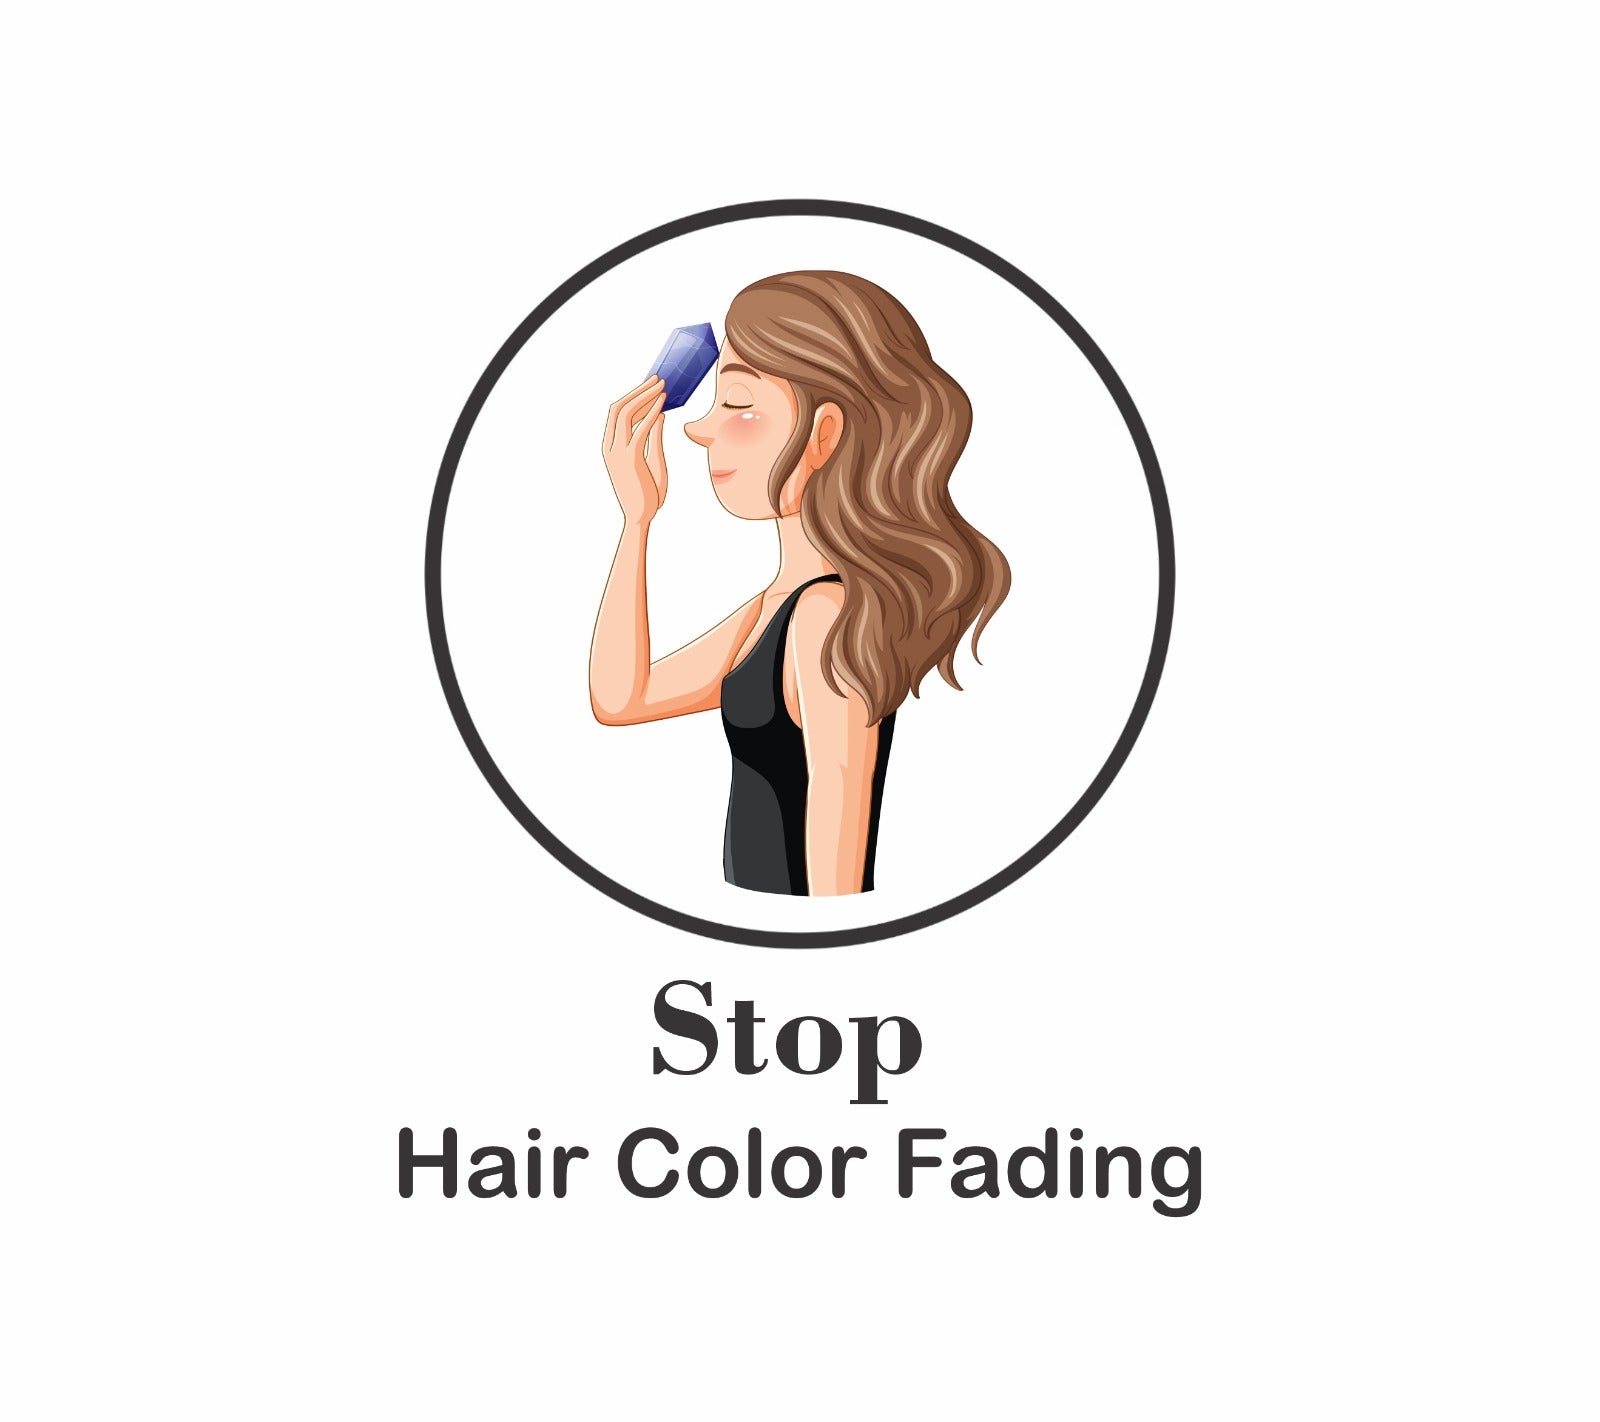 Stop Hair Color Fading